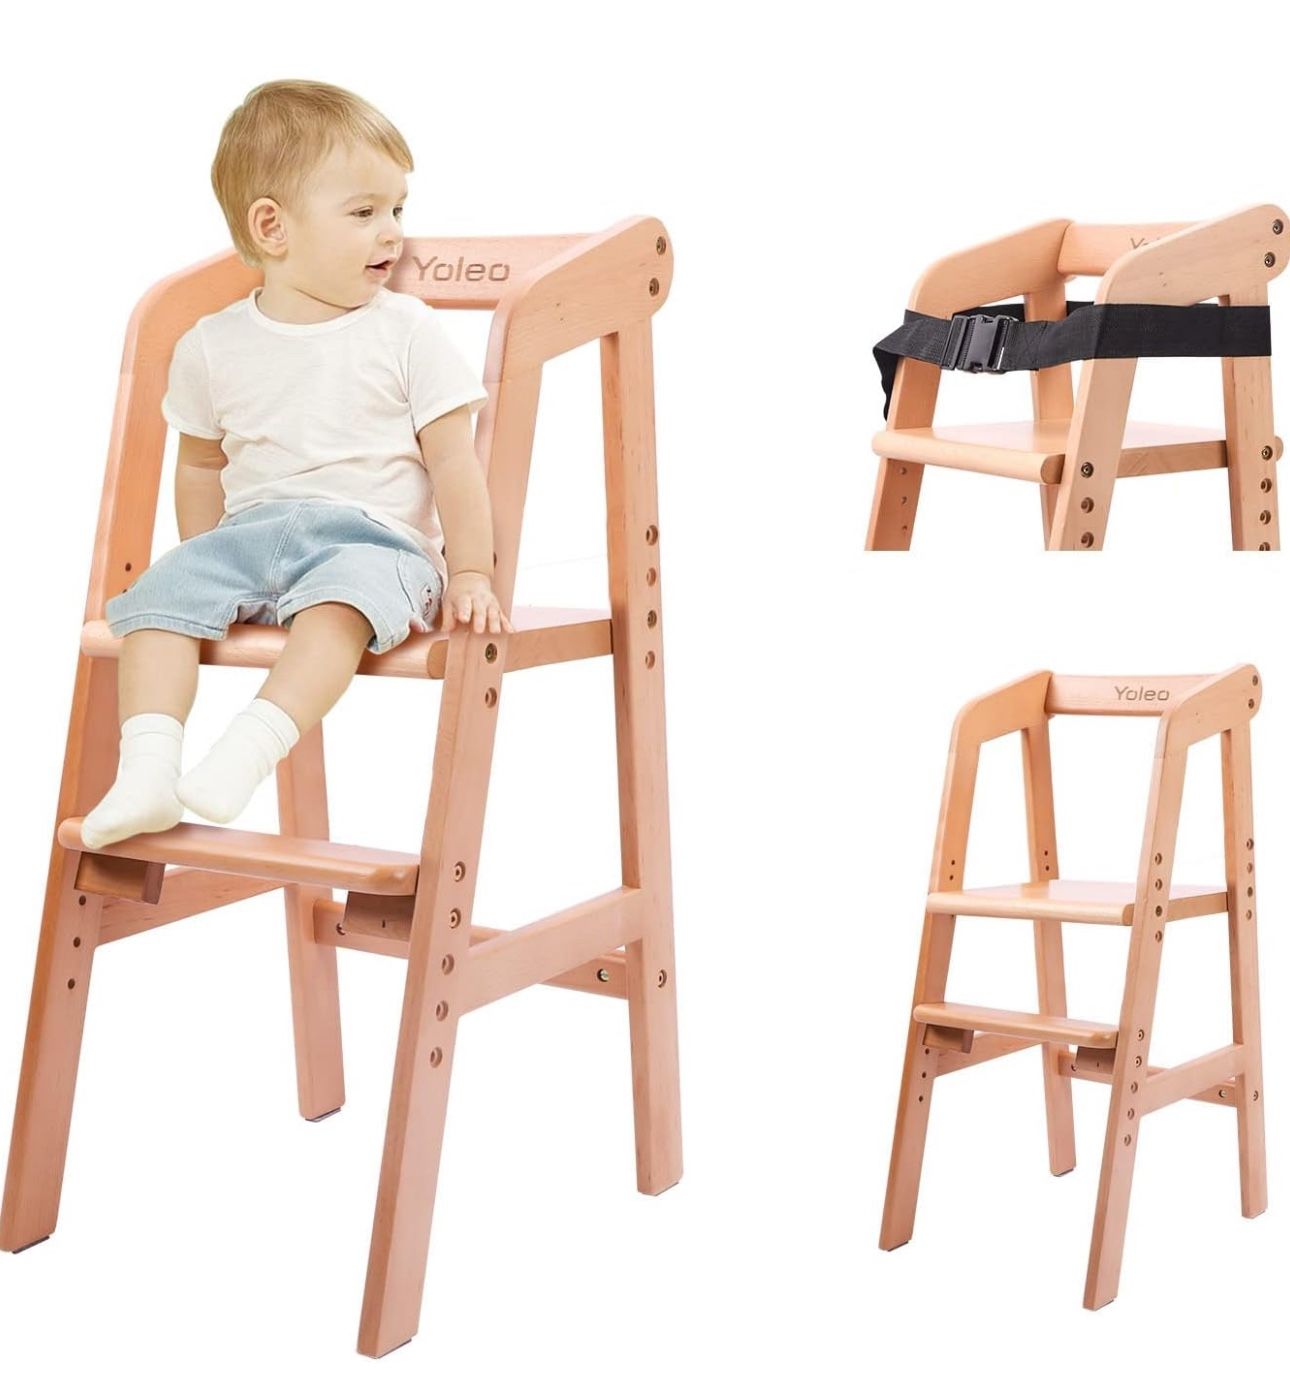 NEW YOLEO High Chair Wooden for Toddlers Junior Childs, Sturdy Durable Dining Feeding Chair with Steps Grows with Child, Max 60kg (Natural Color)